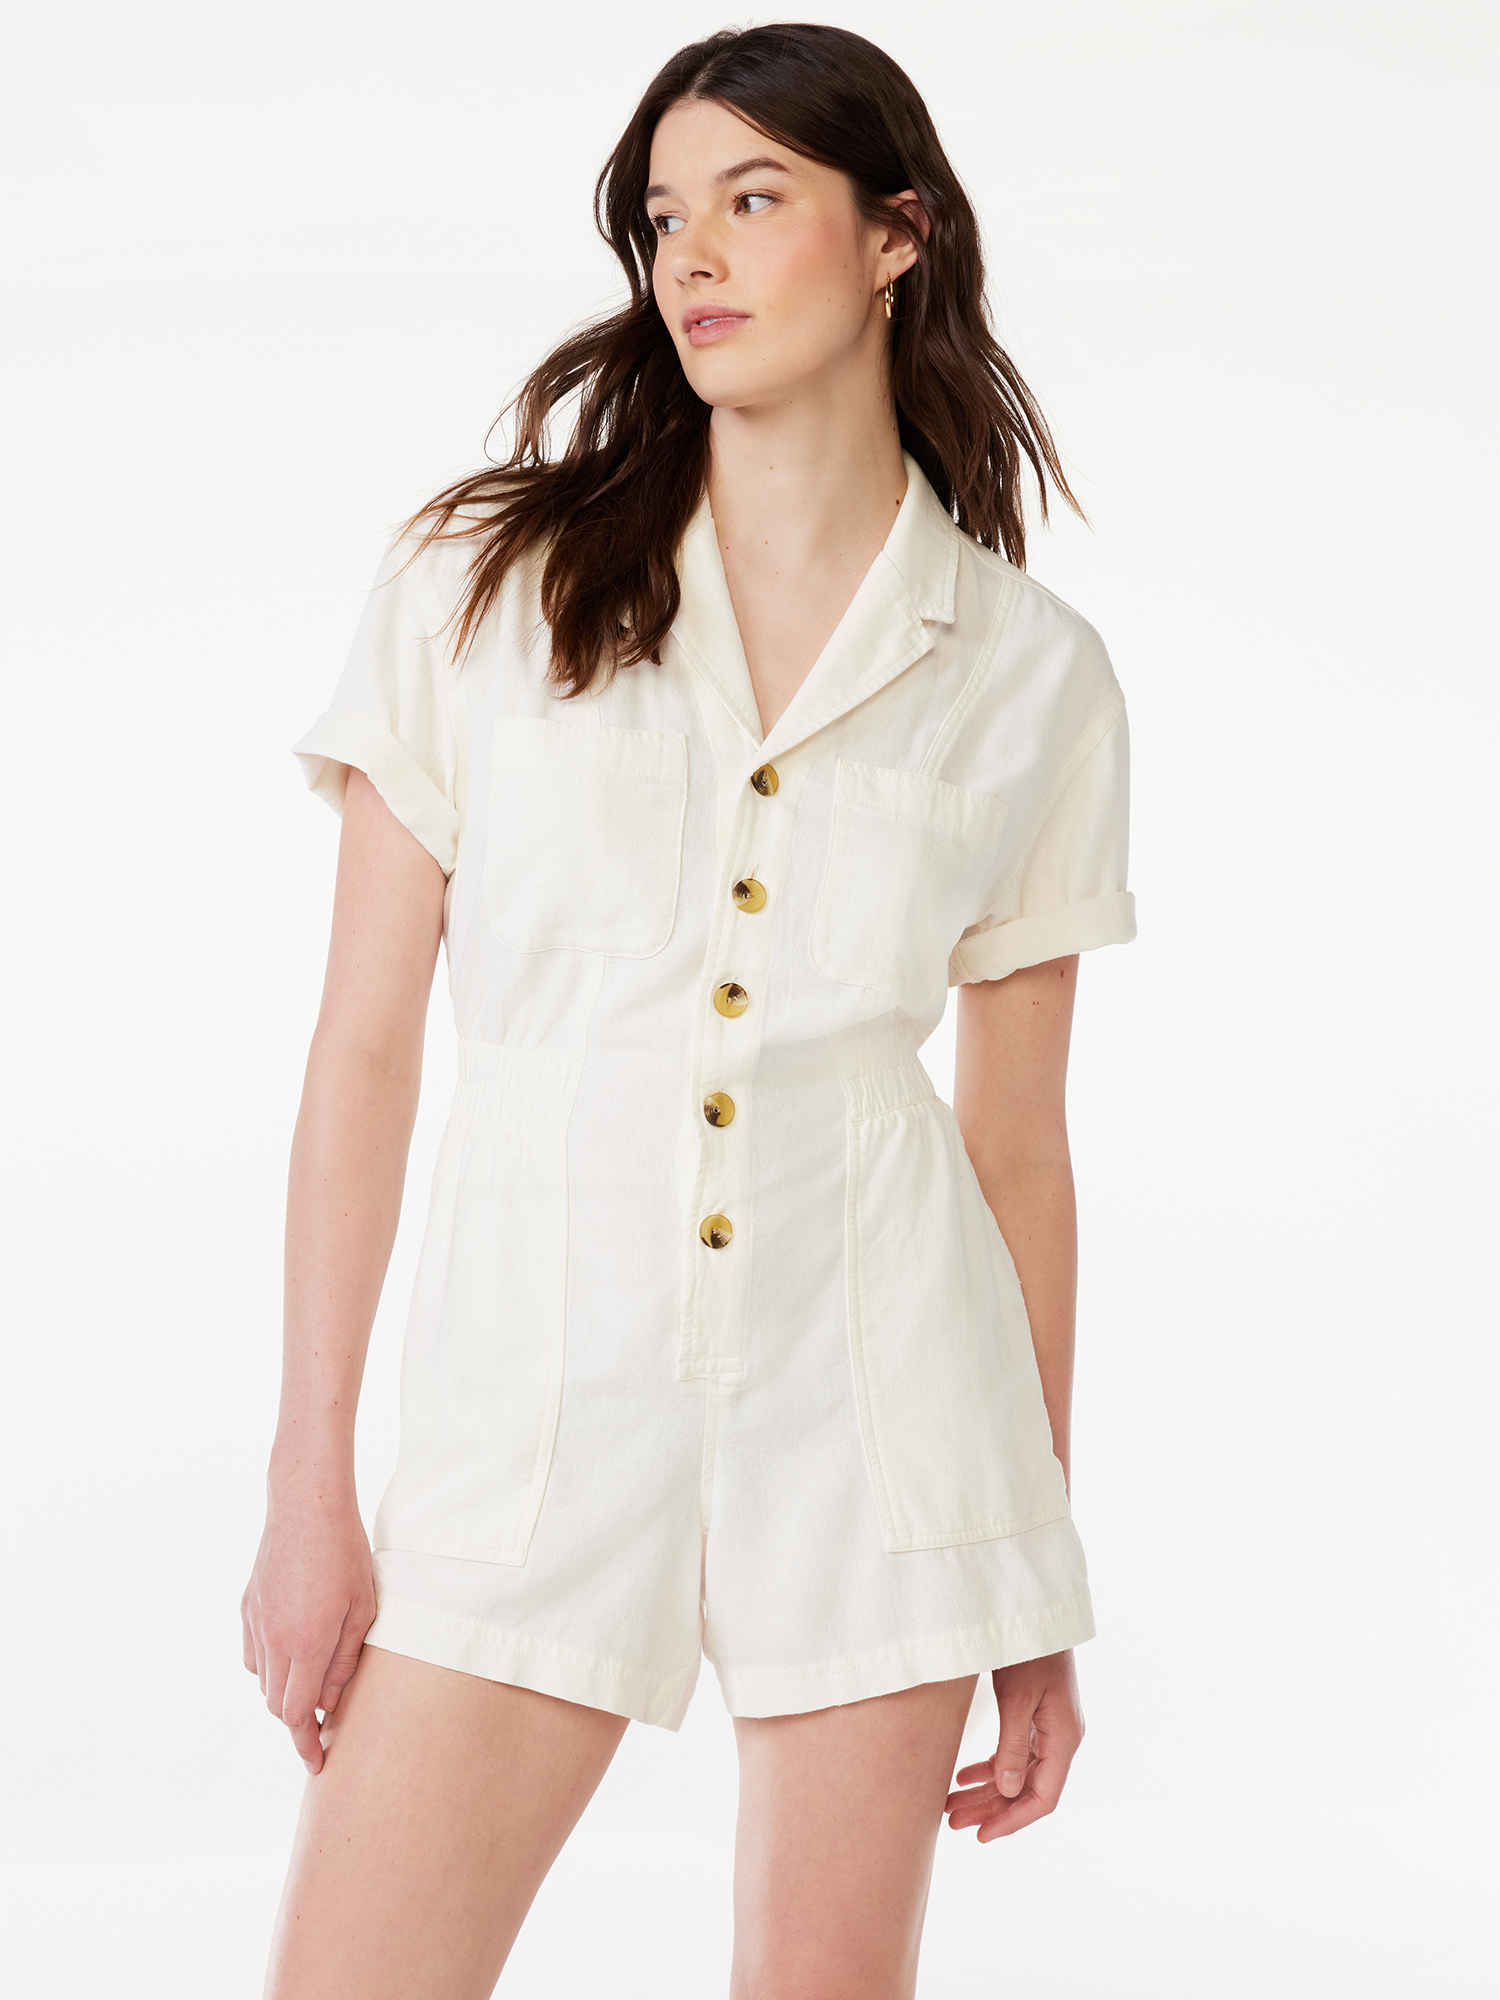 Free Assembly Women's Short Sleeve Romper with Elastic Waist - image 1 of 6